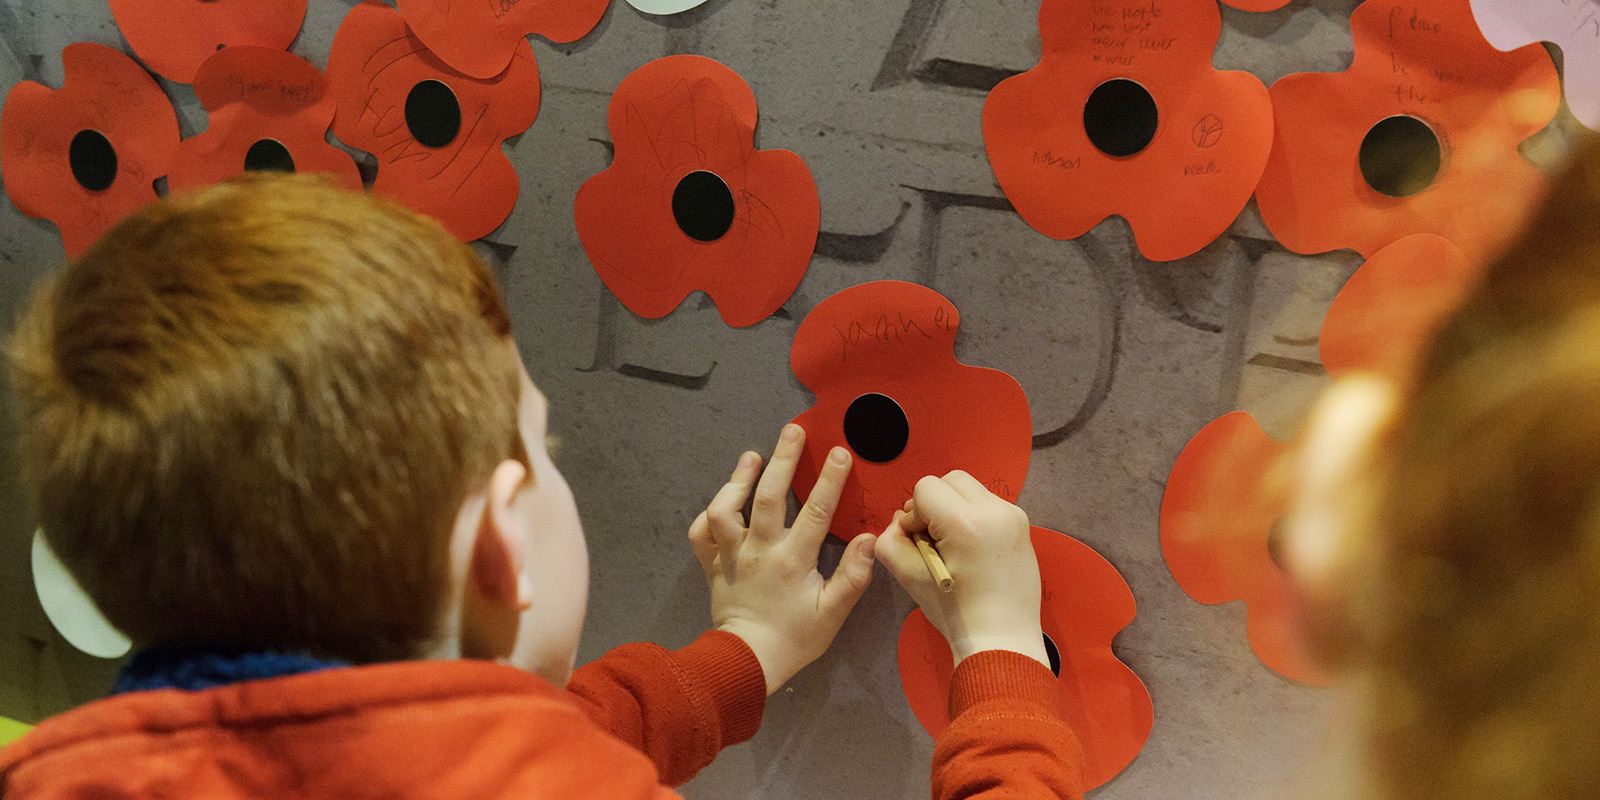 Child writing a message on paper poppies